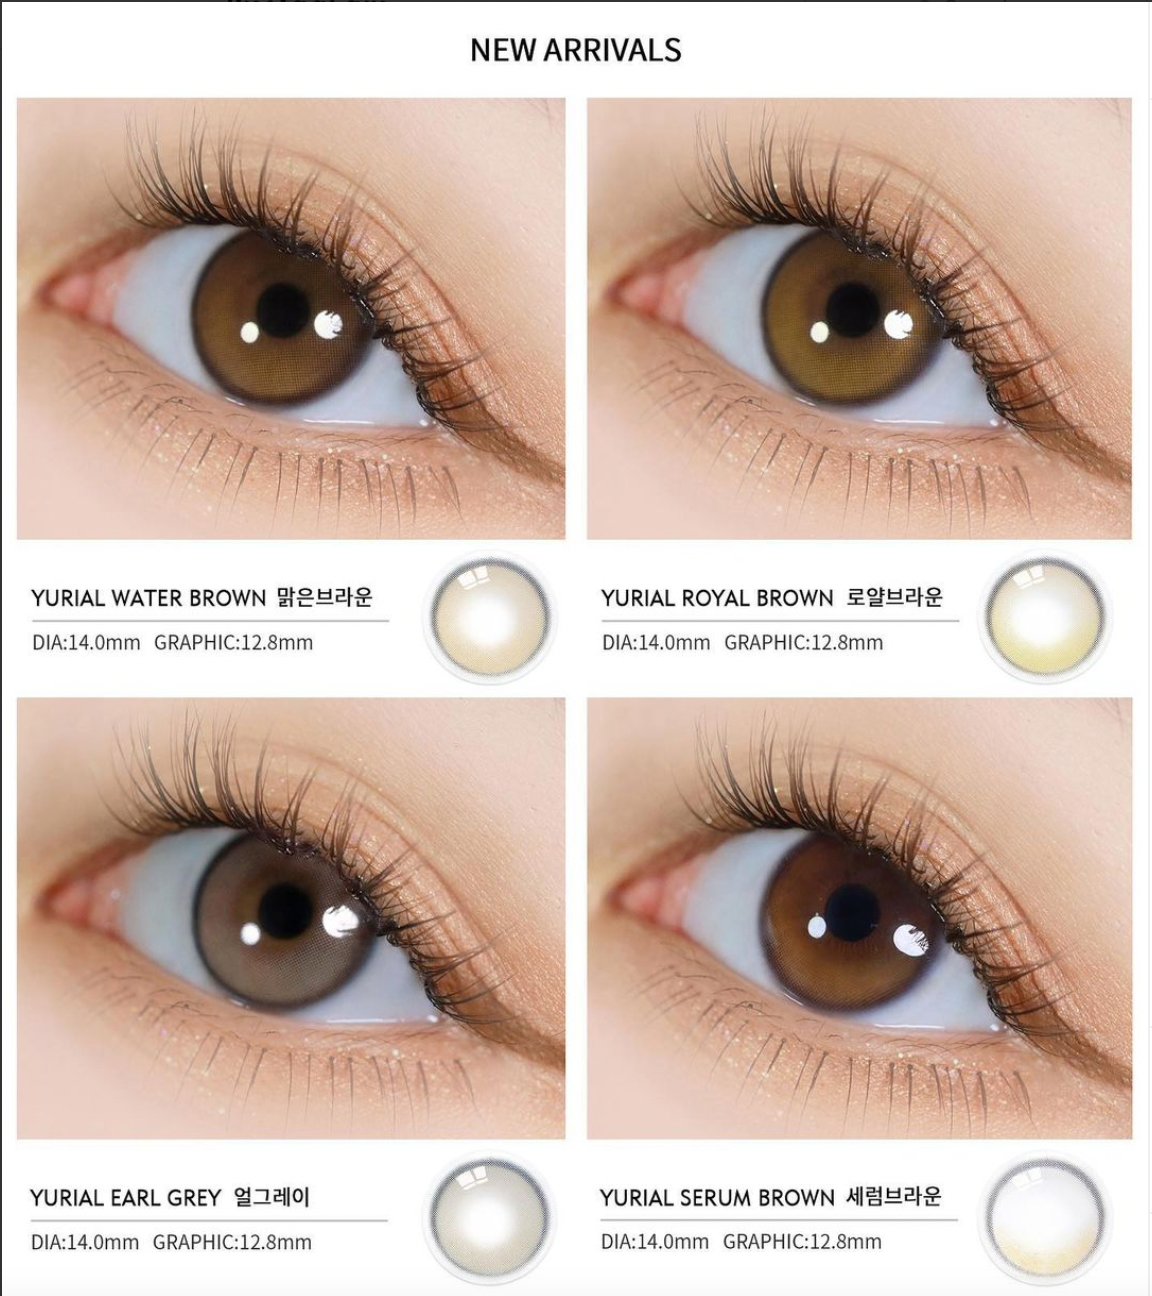 [Ready] I-Dol Lens Yurial Royal Brown | 6 Months